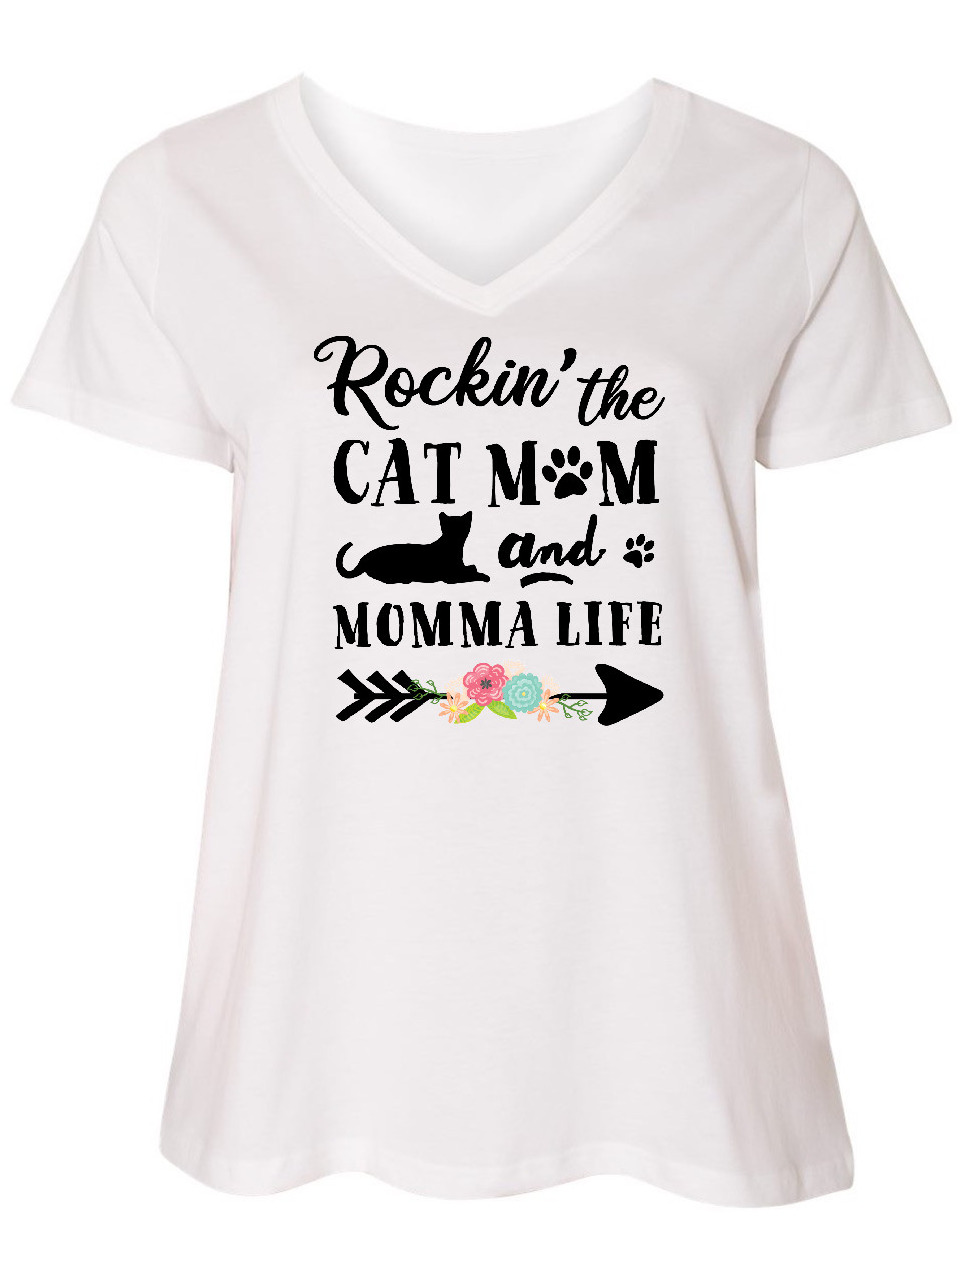 INKtastic - Inktastic Rockin' the Cat Mom and Momma Life Adult Women's ...